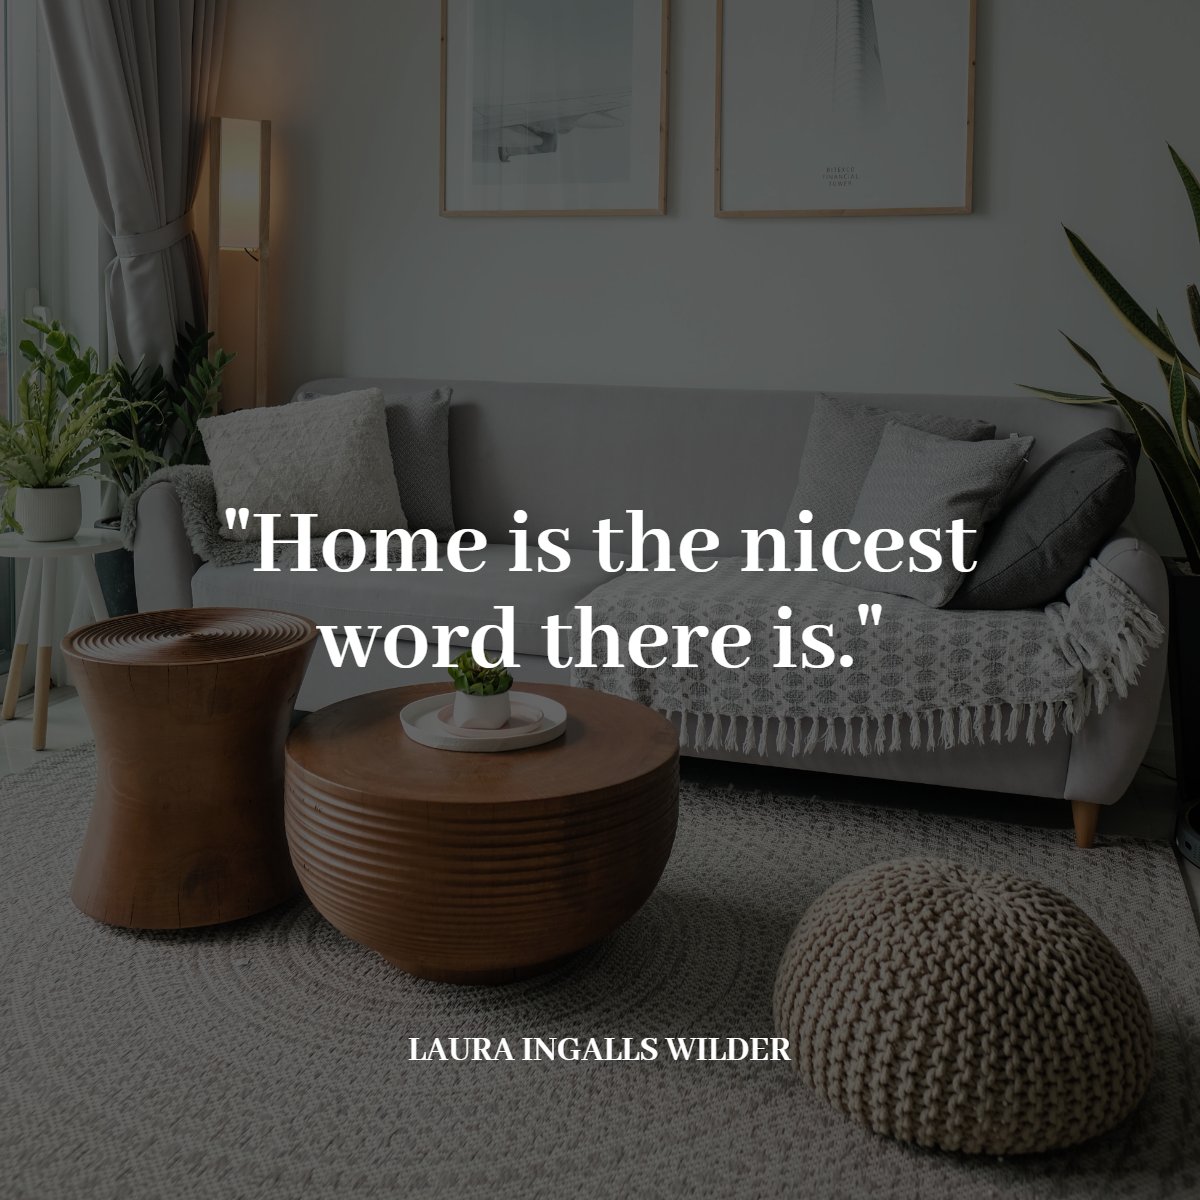 'Home is the nicest word there is.' 📖
― Laura Ingalls Wilder 

#home #quote #word #family #requotes #quoteoftheday #lauraingallswilder
 #mkehomes #mkeliving #withyouonyourjourneyhome